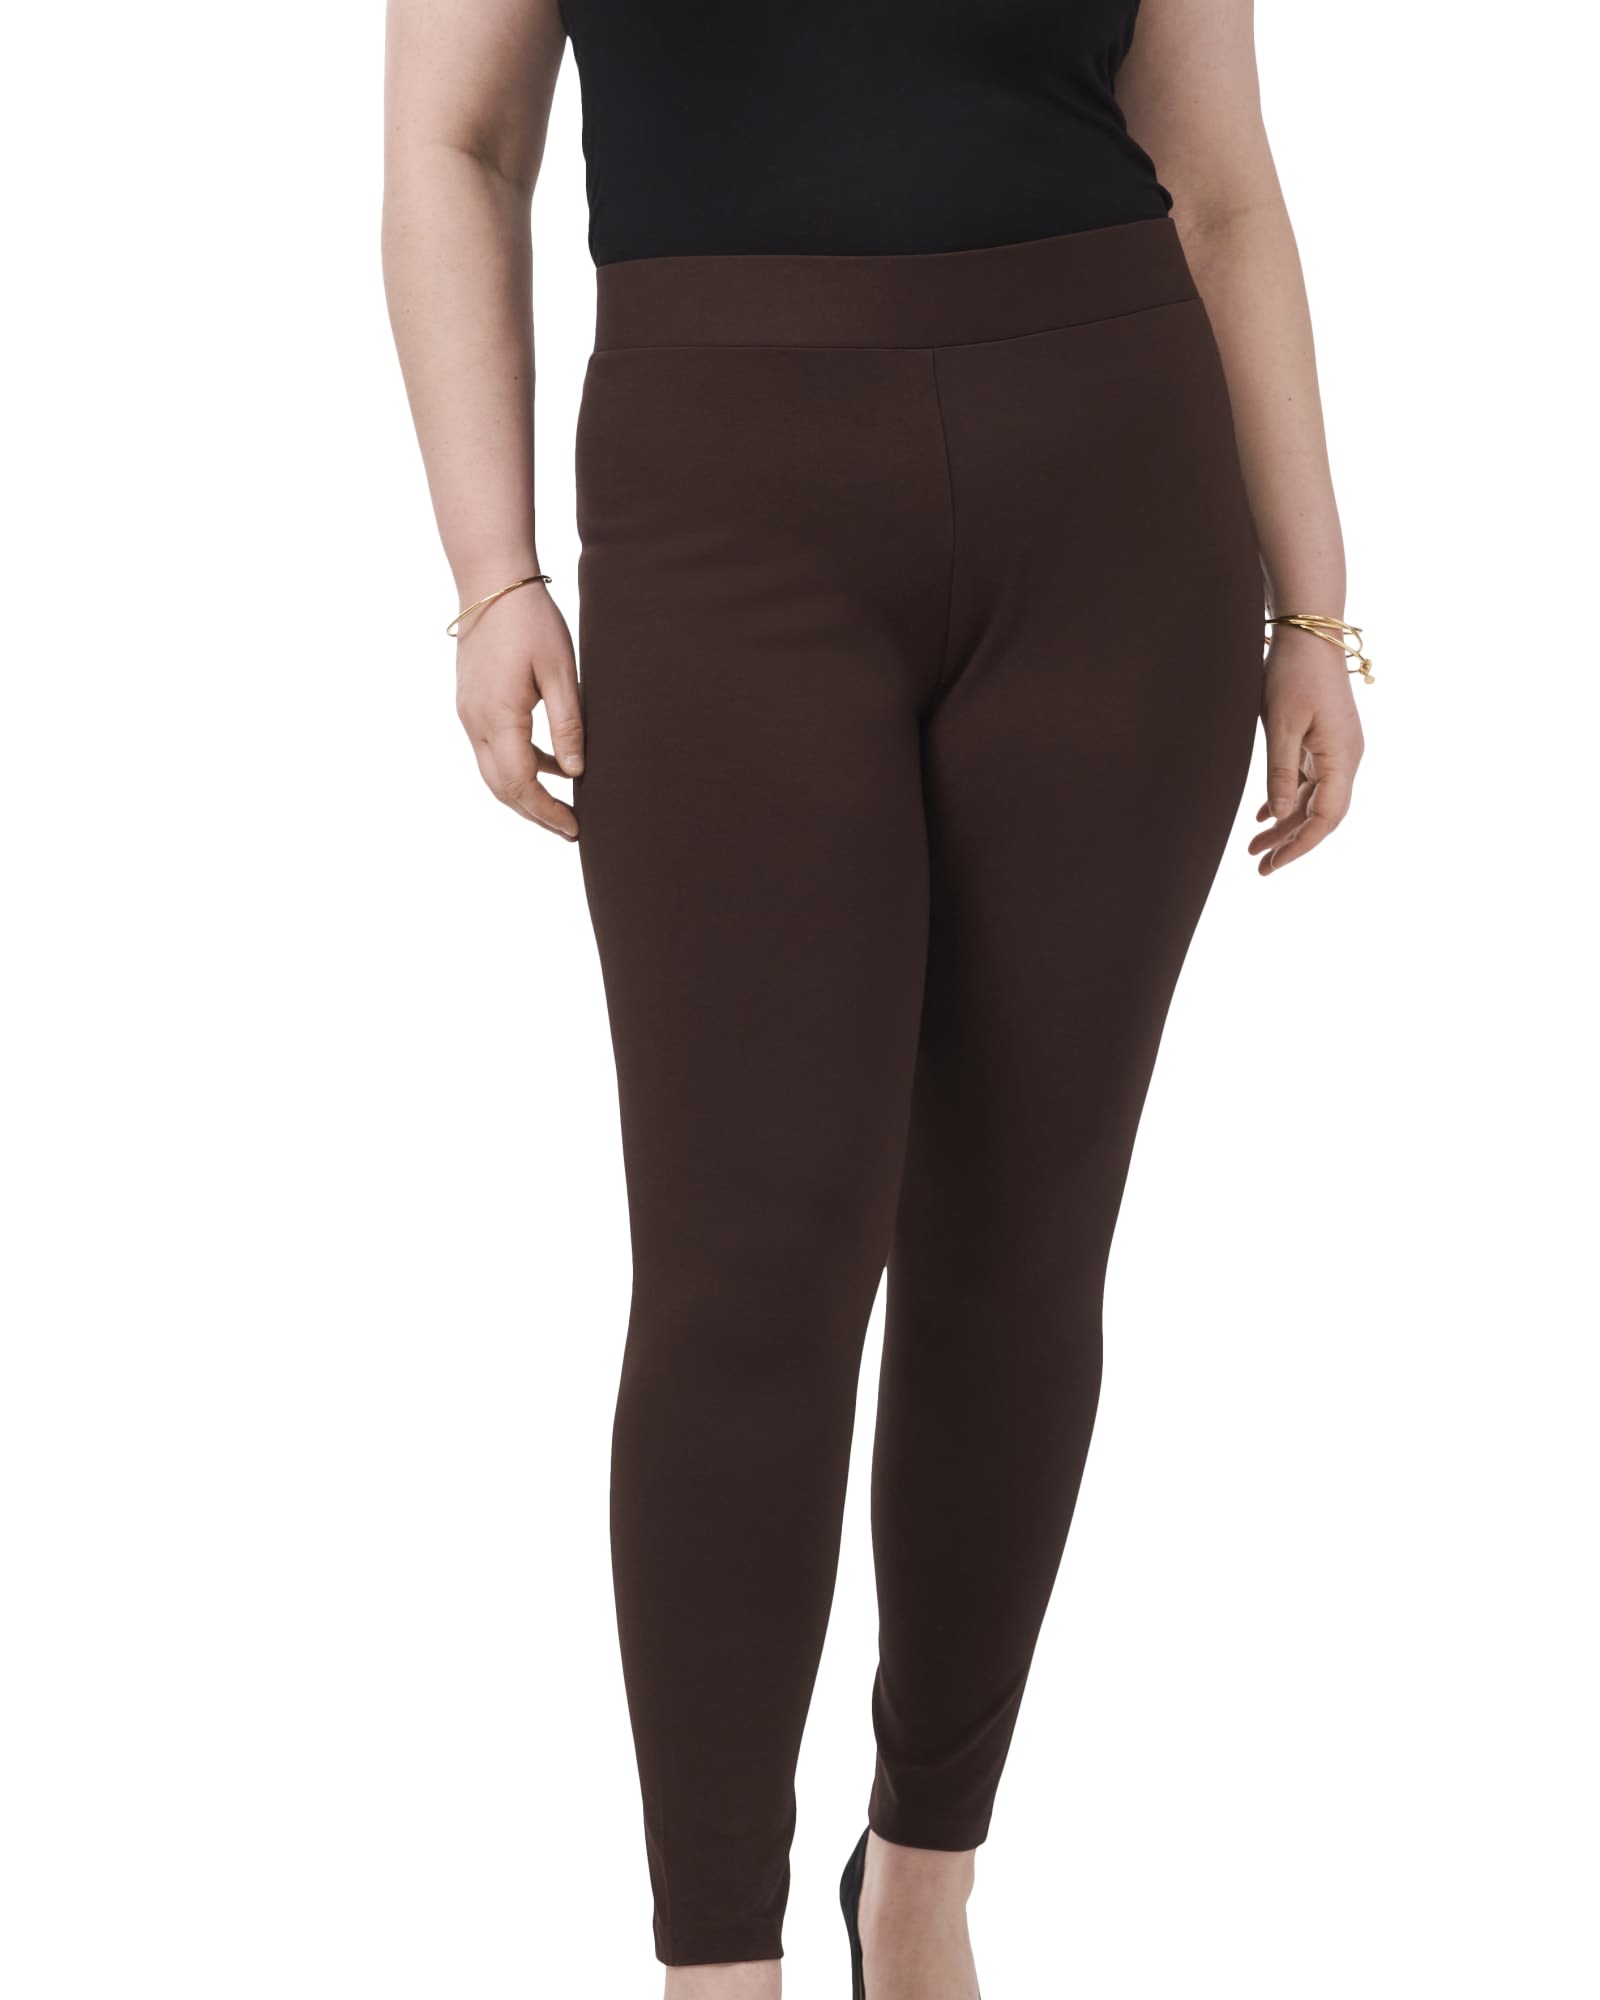 how to wear plus size leggings to work